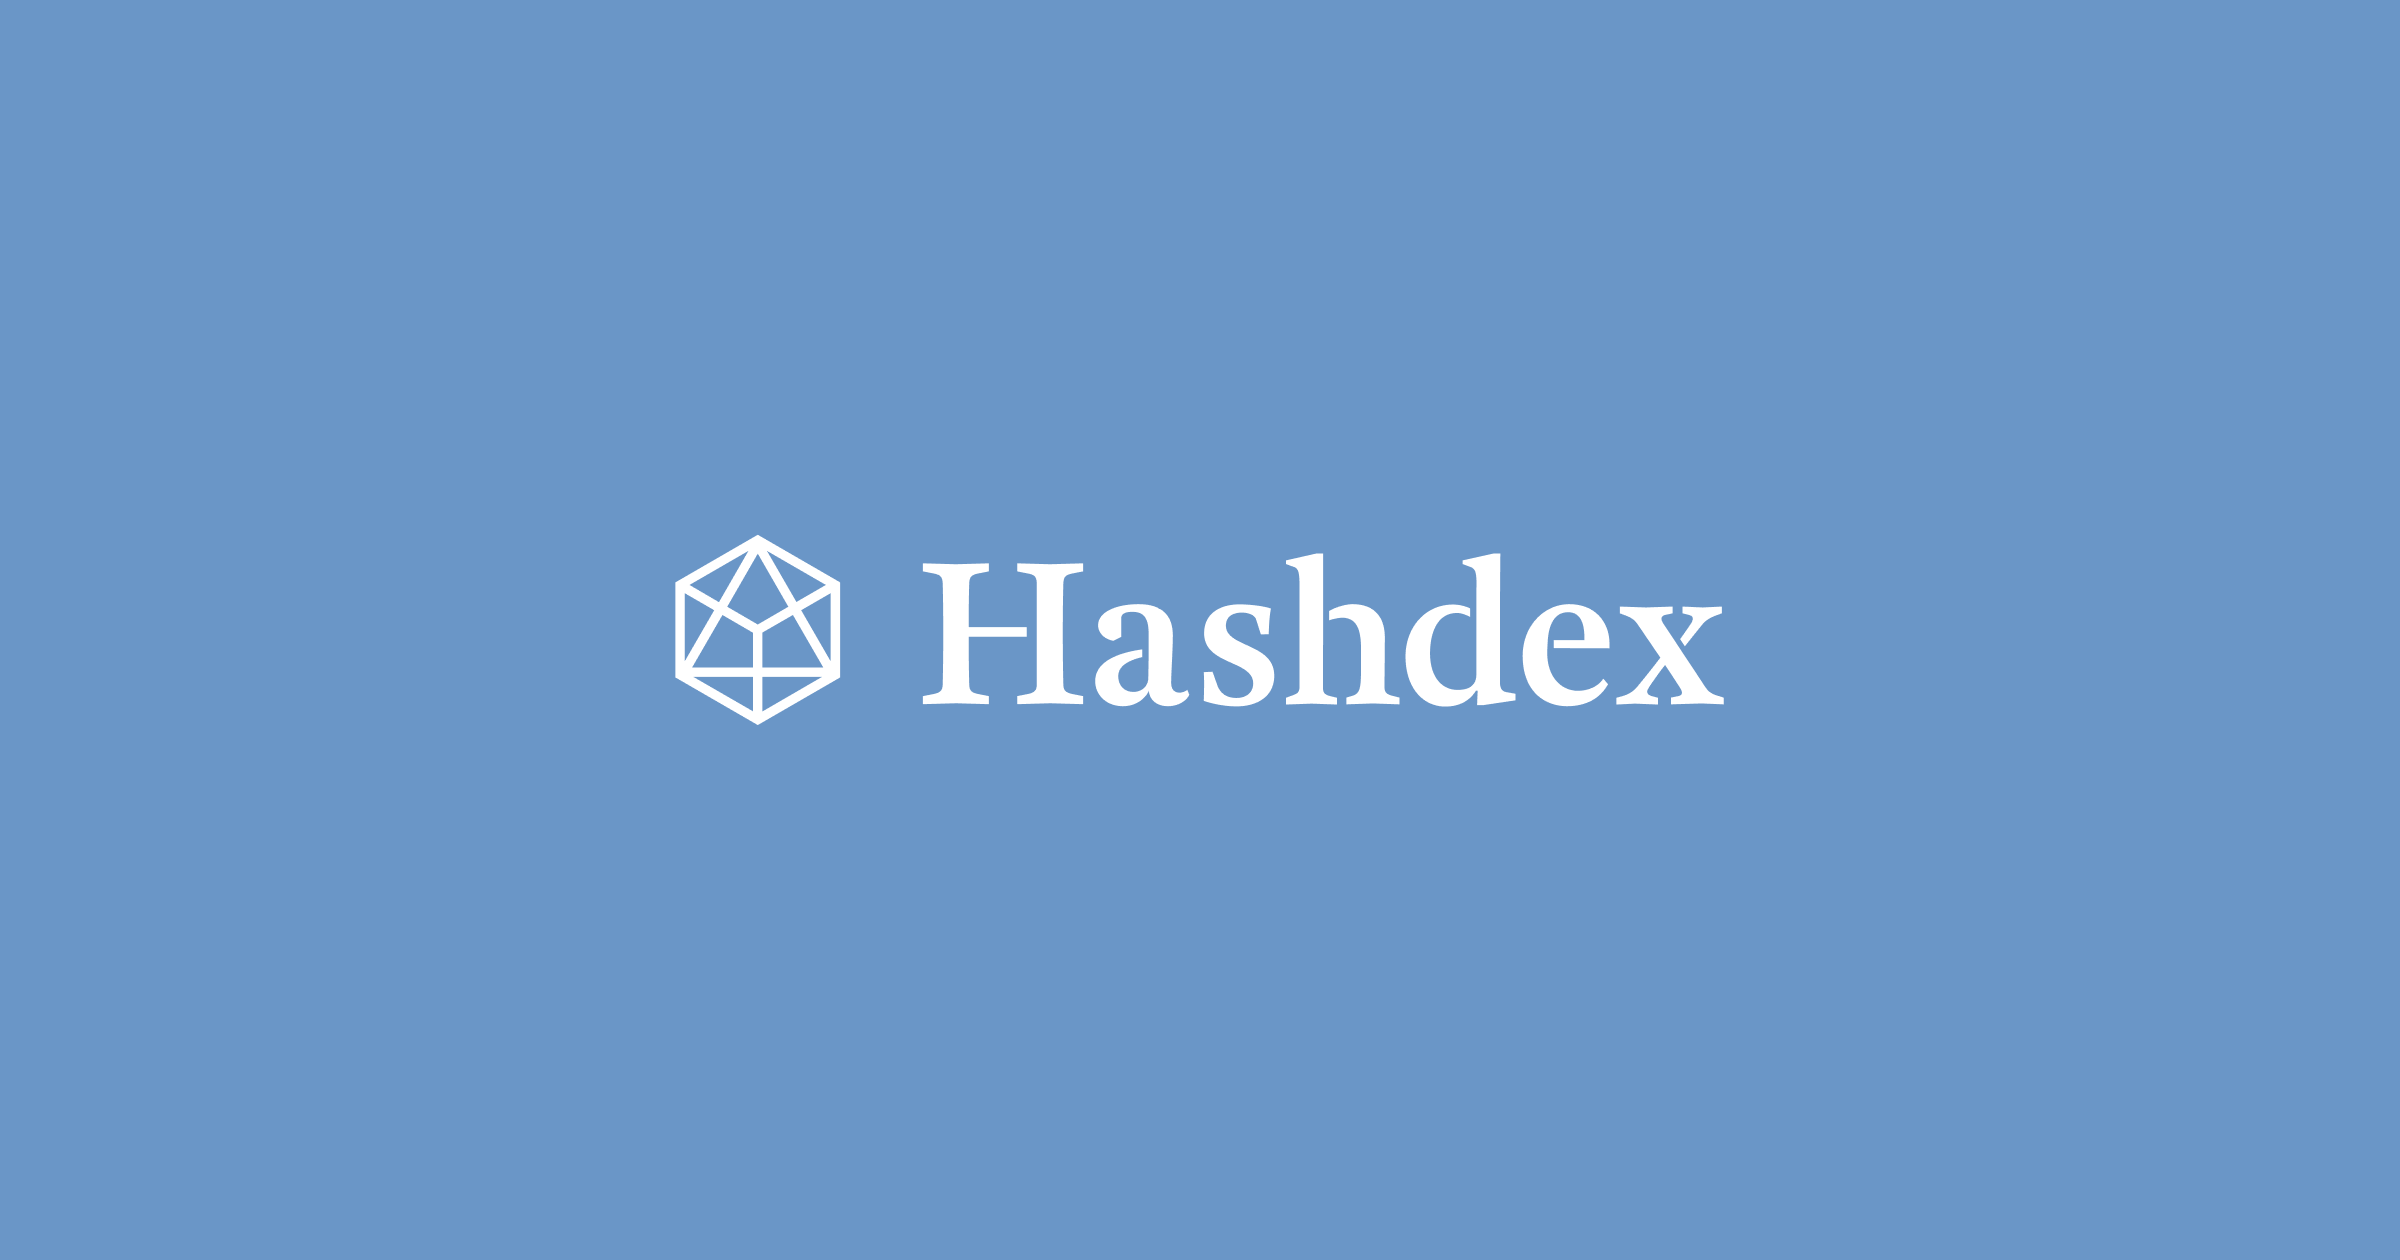 Hashdex set to launch world's first pure-play DeFi ETF, DEFI11, powered by CF DeFi Composite Index